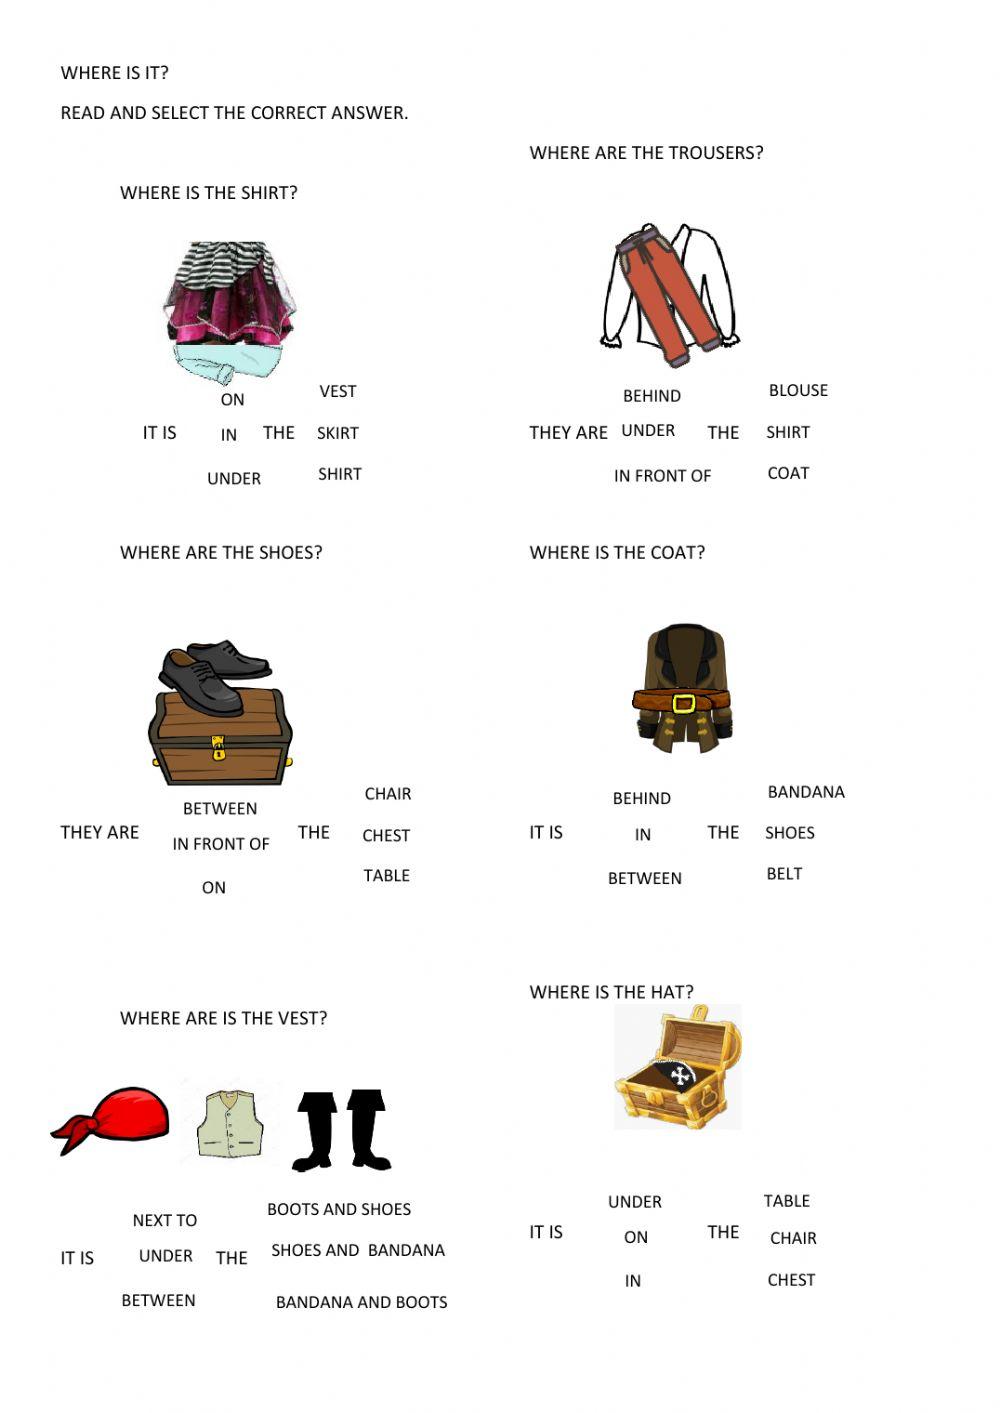 Pirate clothes and prepositions